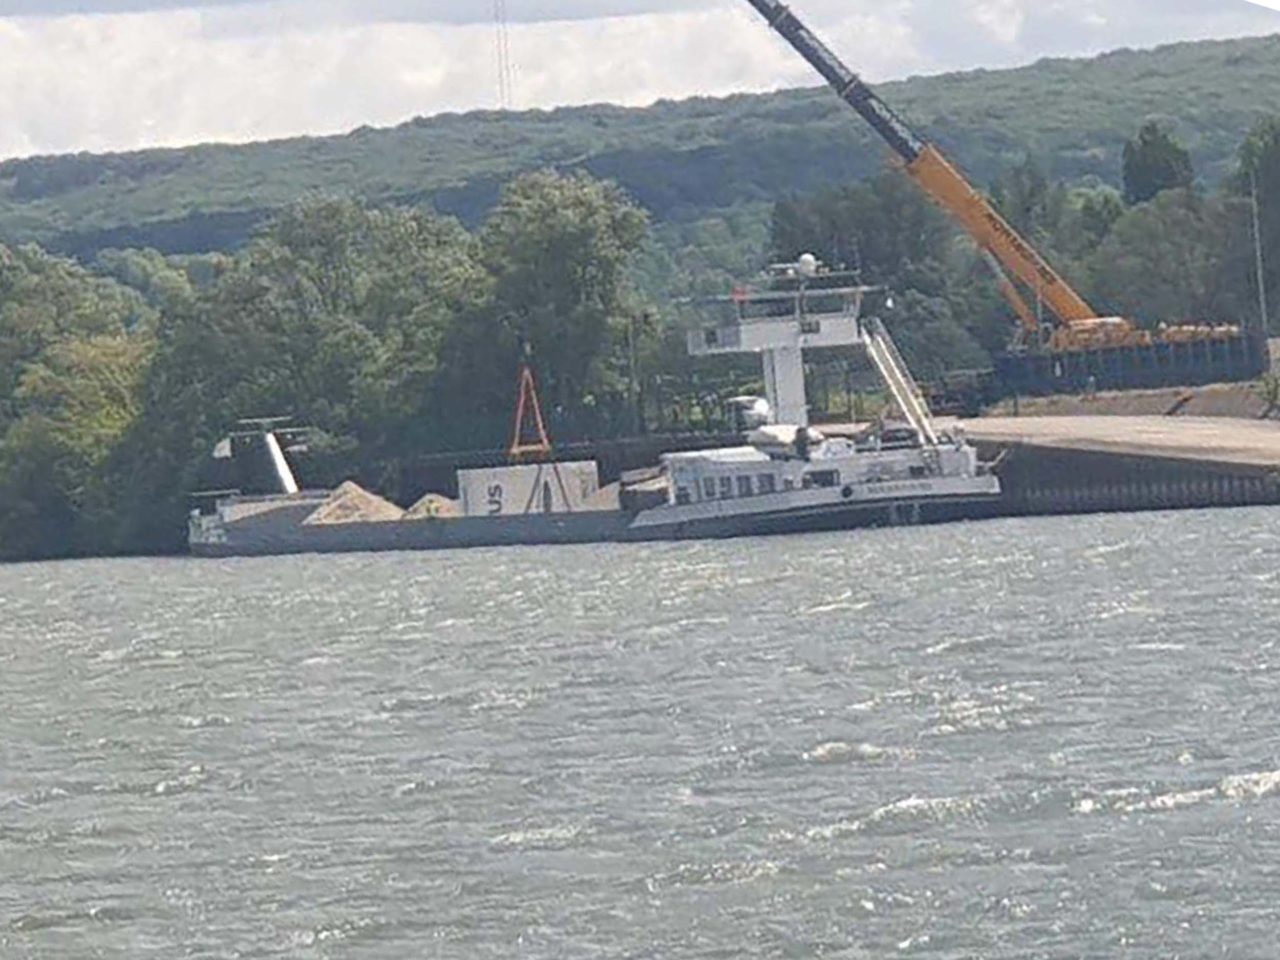 On arrival, the container – weighing around 20 tons and five meters high – was removed from the barge at the cargo port at the Les Mureaux site.